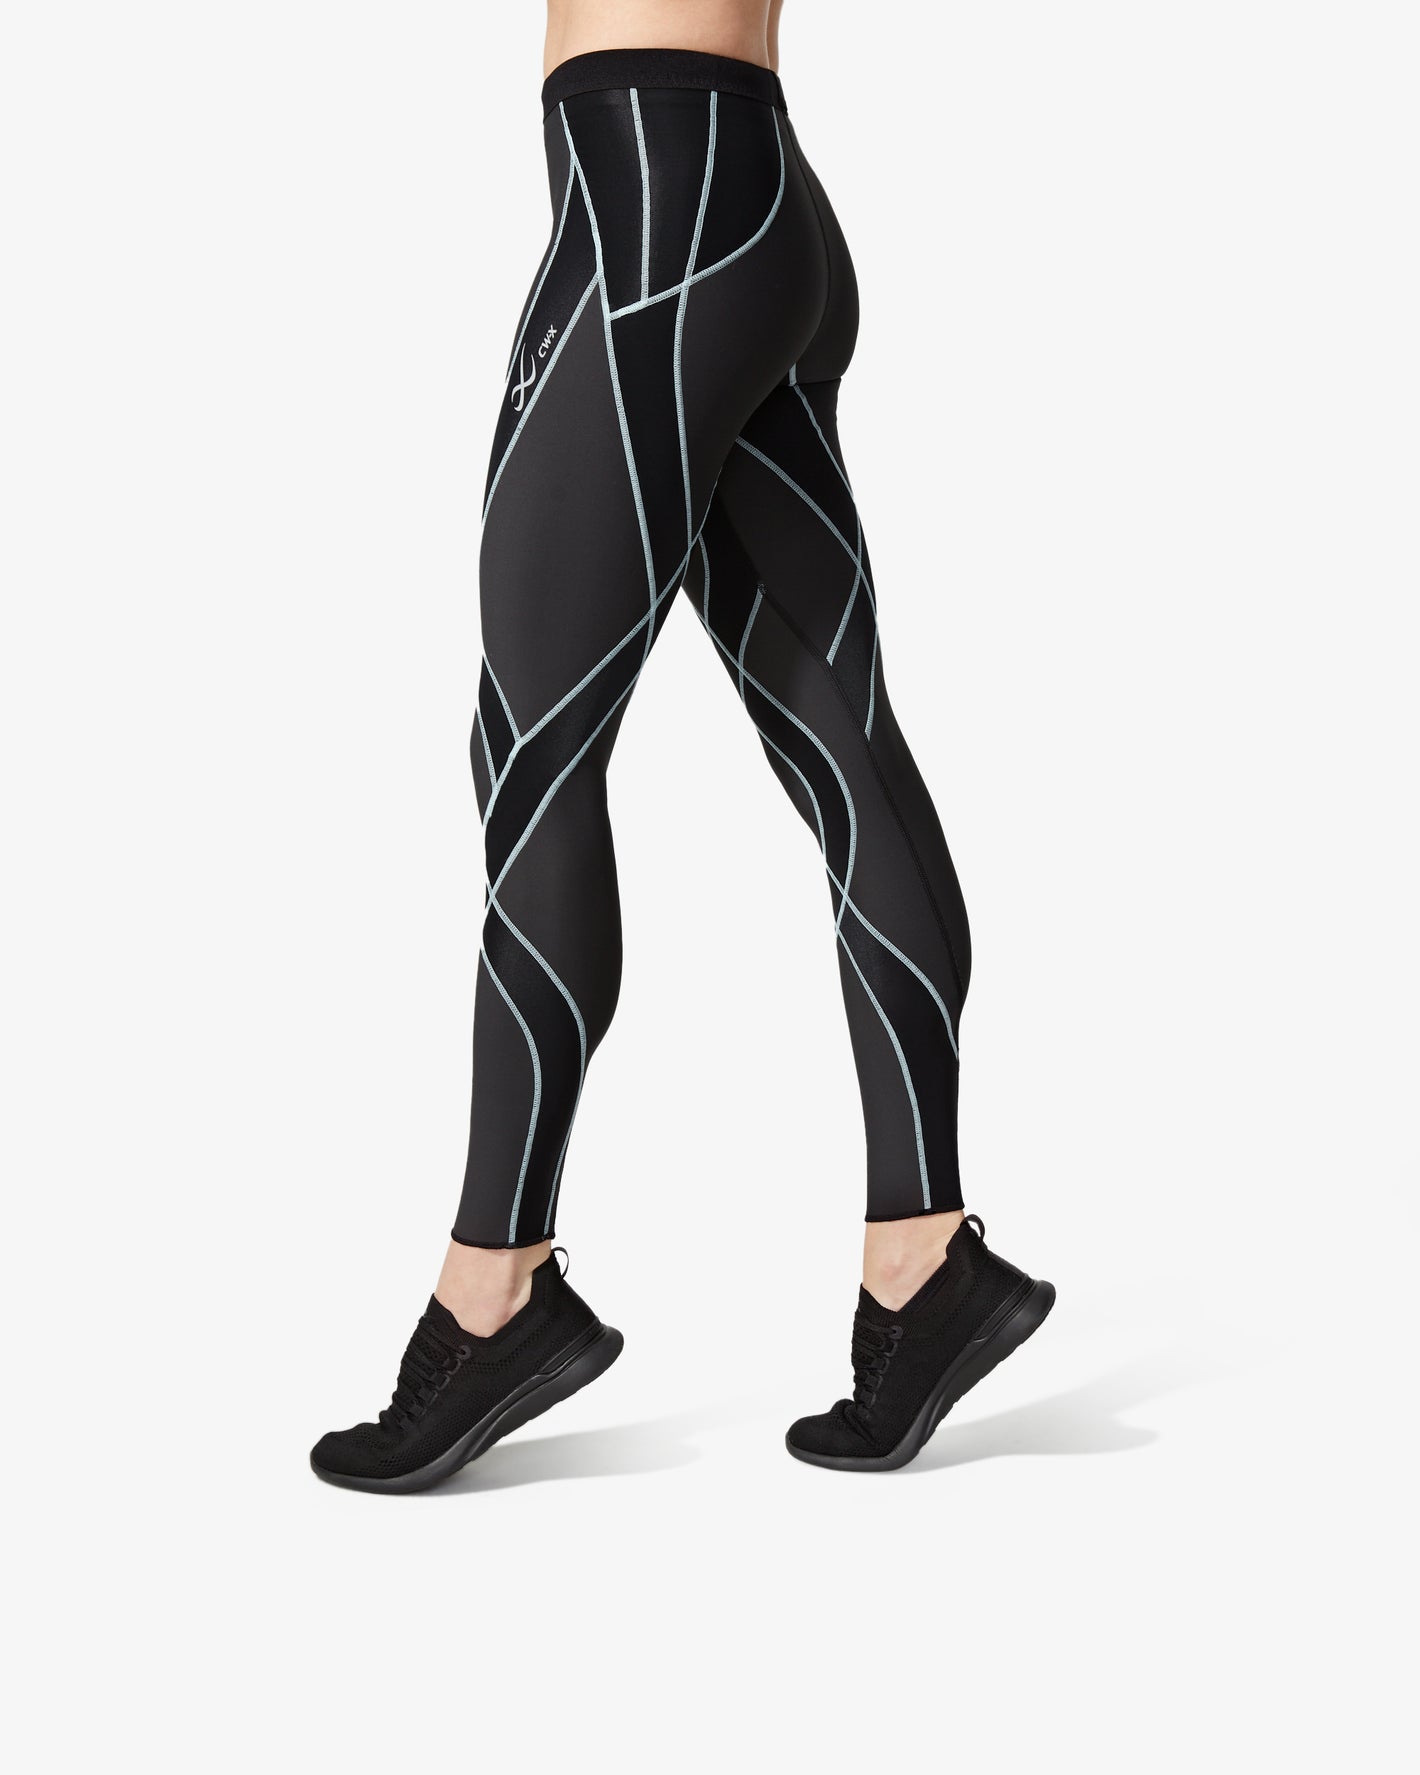 CWX Joint Compression Tight Black Leggings Womens Support